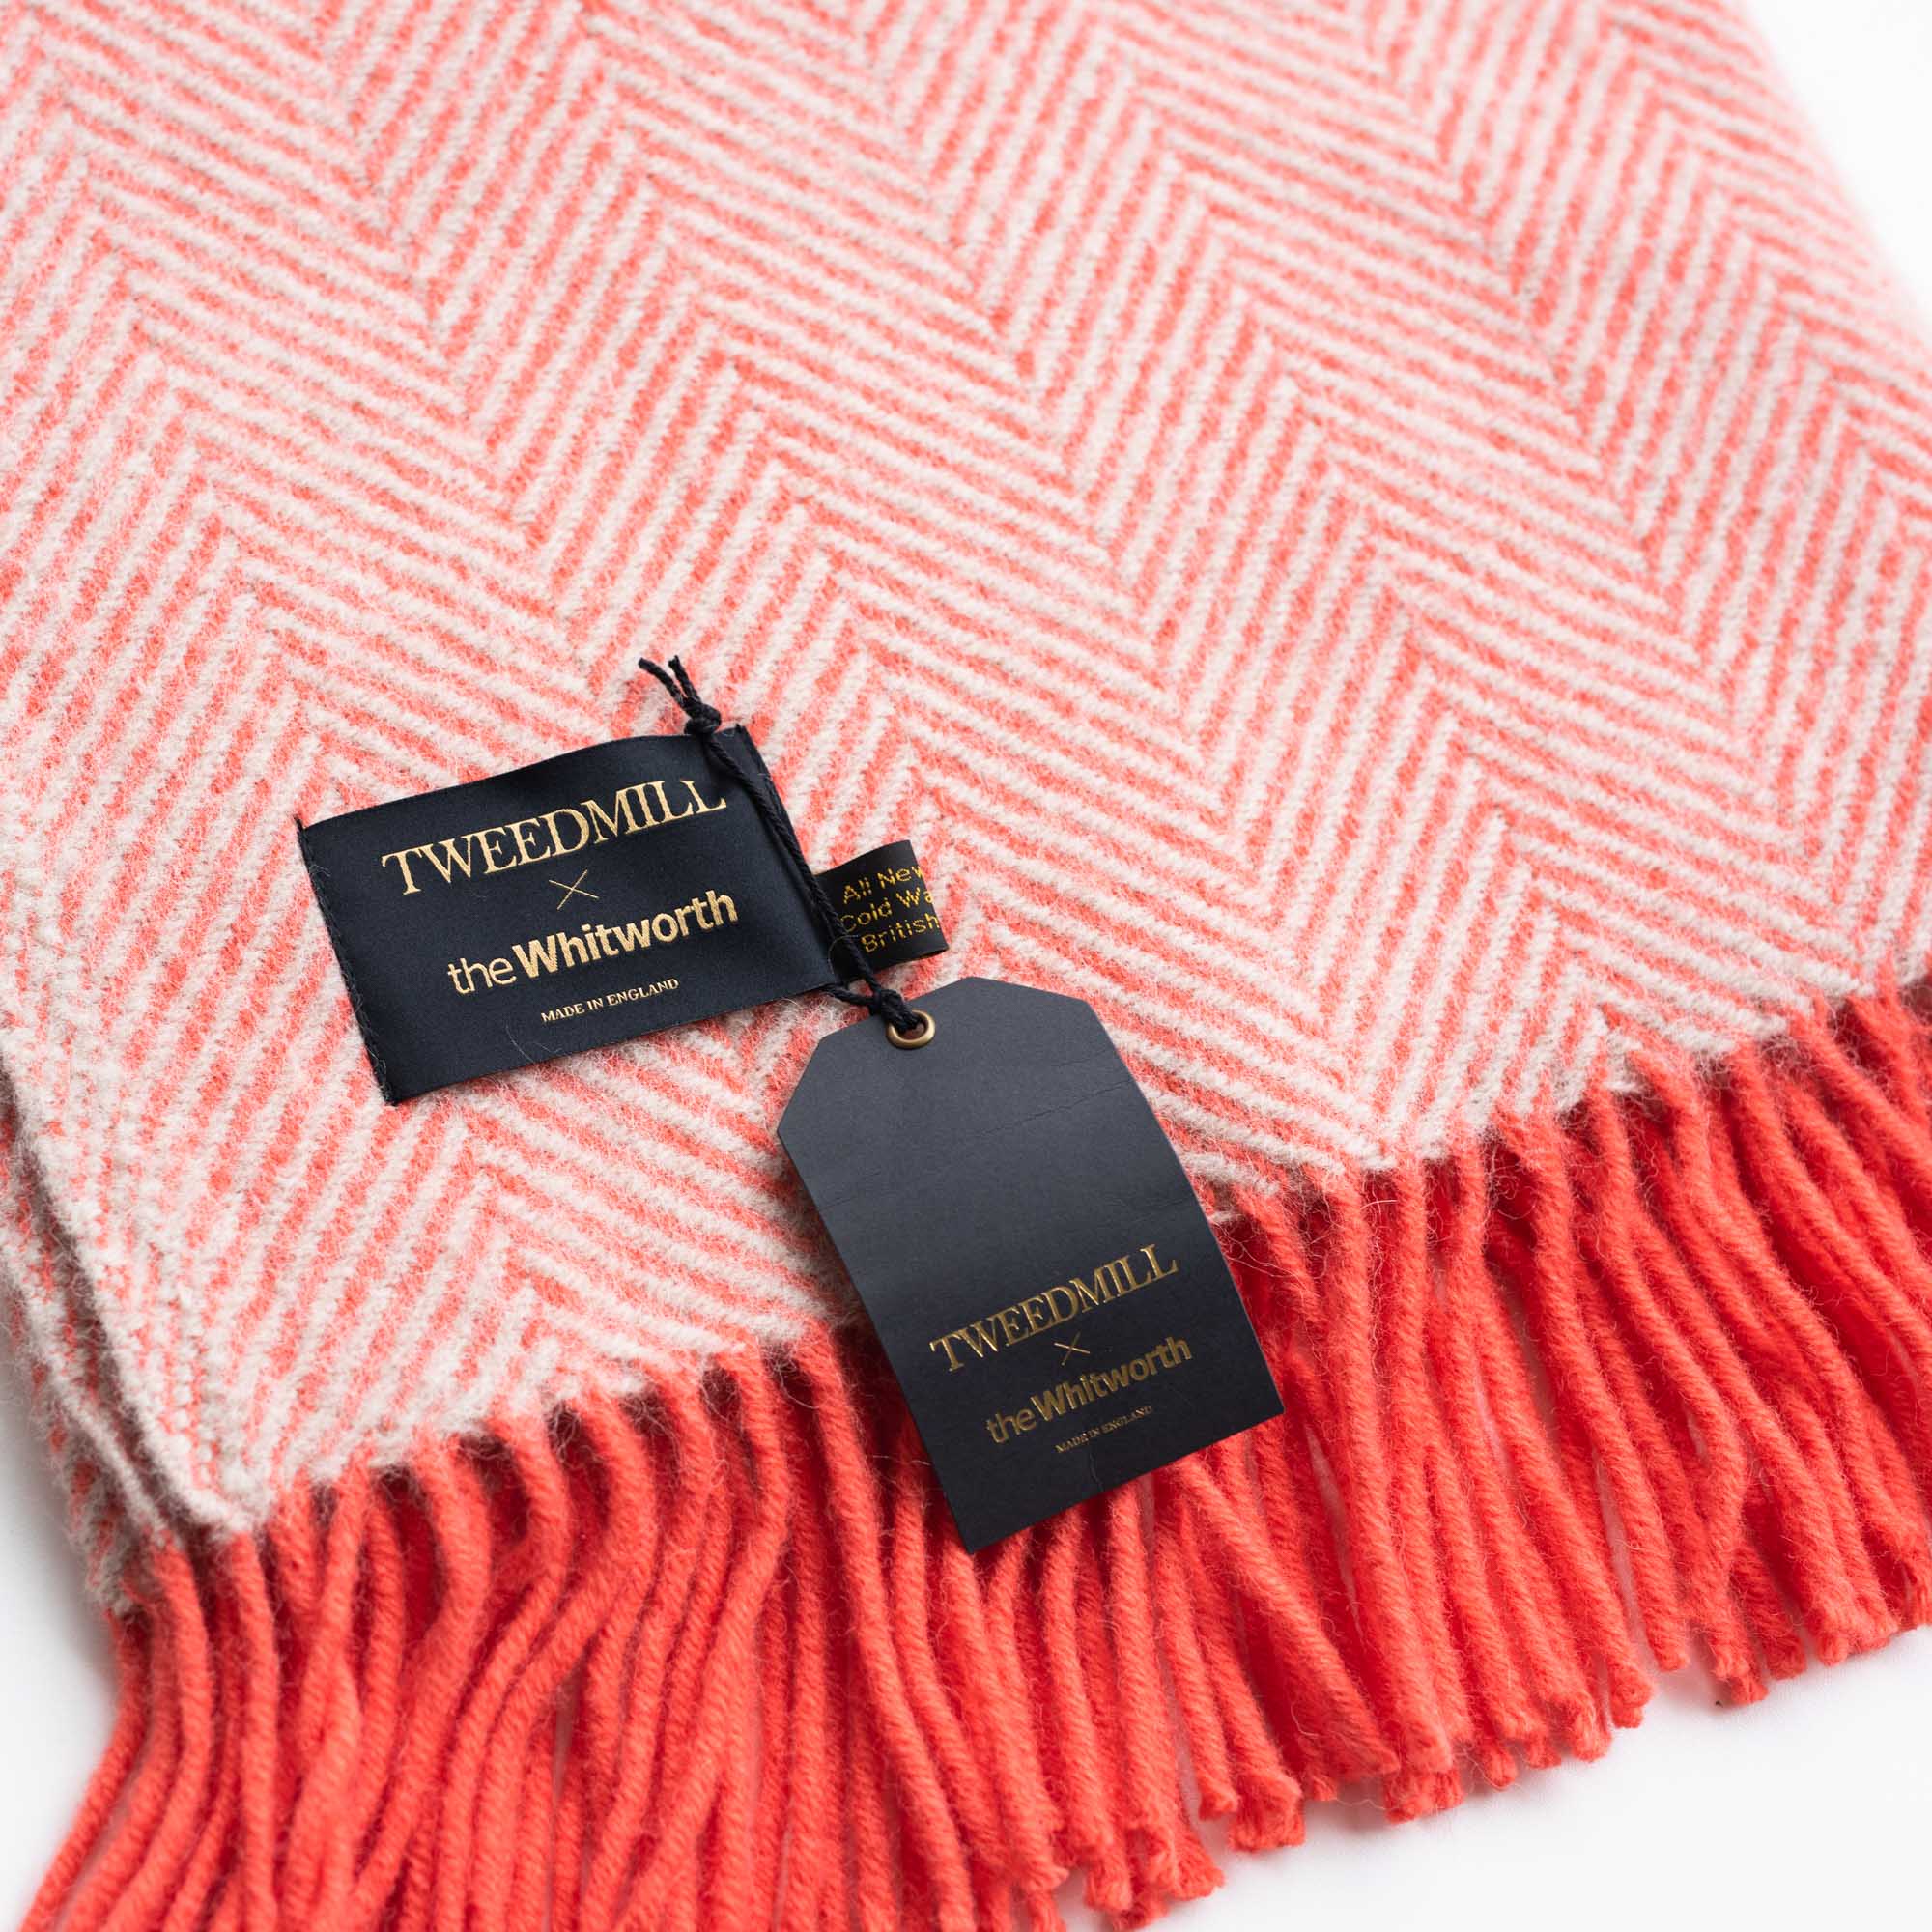 Close up of red woollen blanket with Tweedmill x Whitworth Label